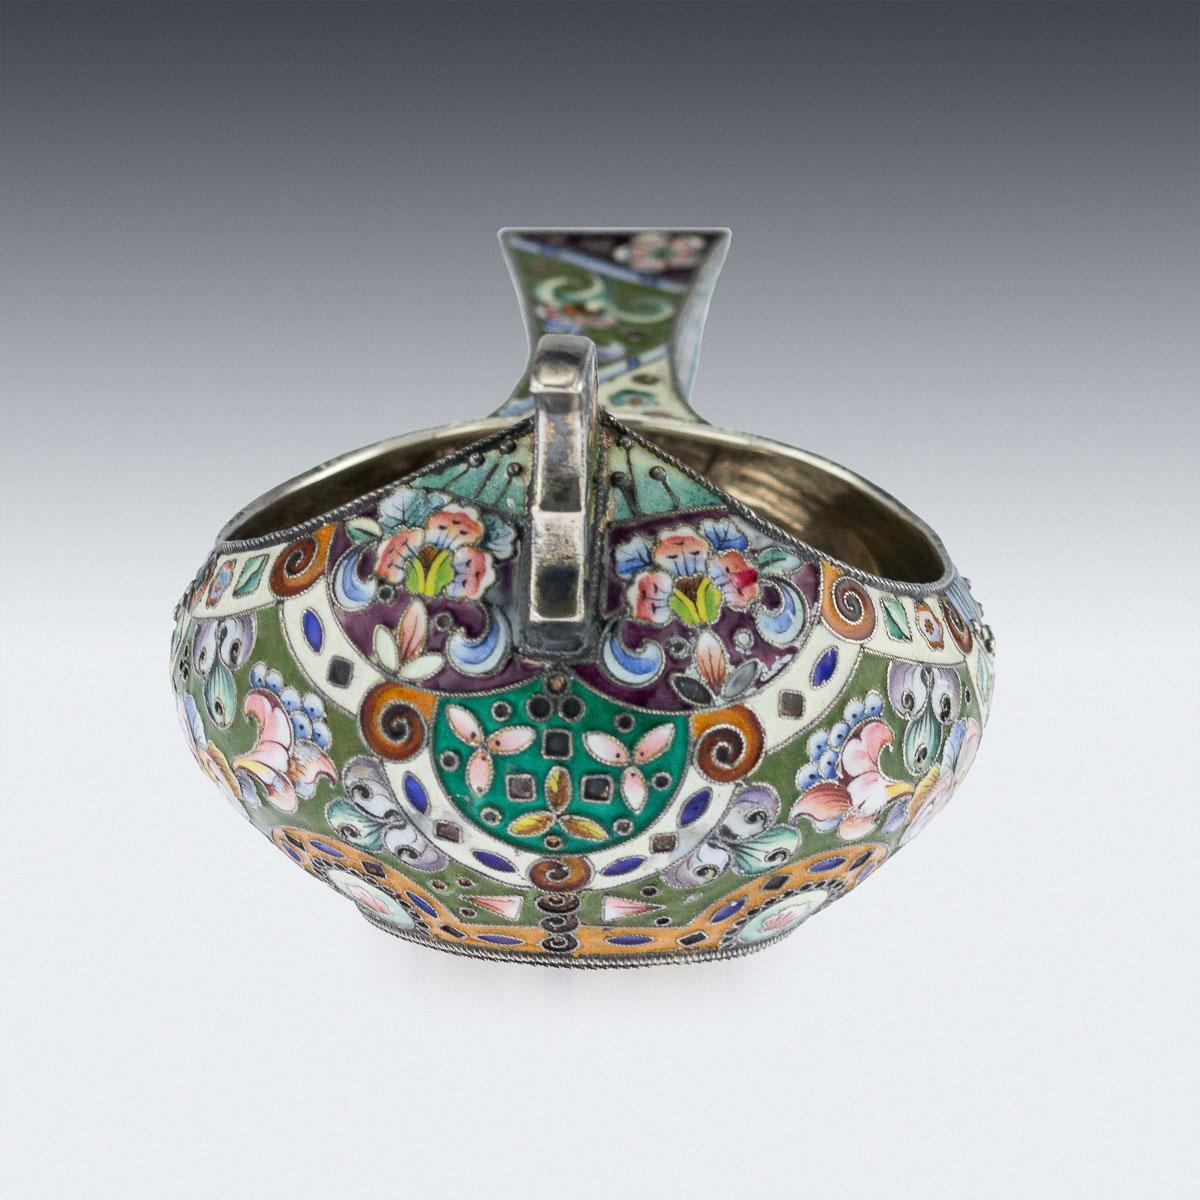 20th Century Russian Solid Silver and Shaded Enamel Kovsh, Grigory Sbitnev, circa 1910